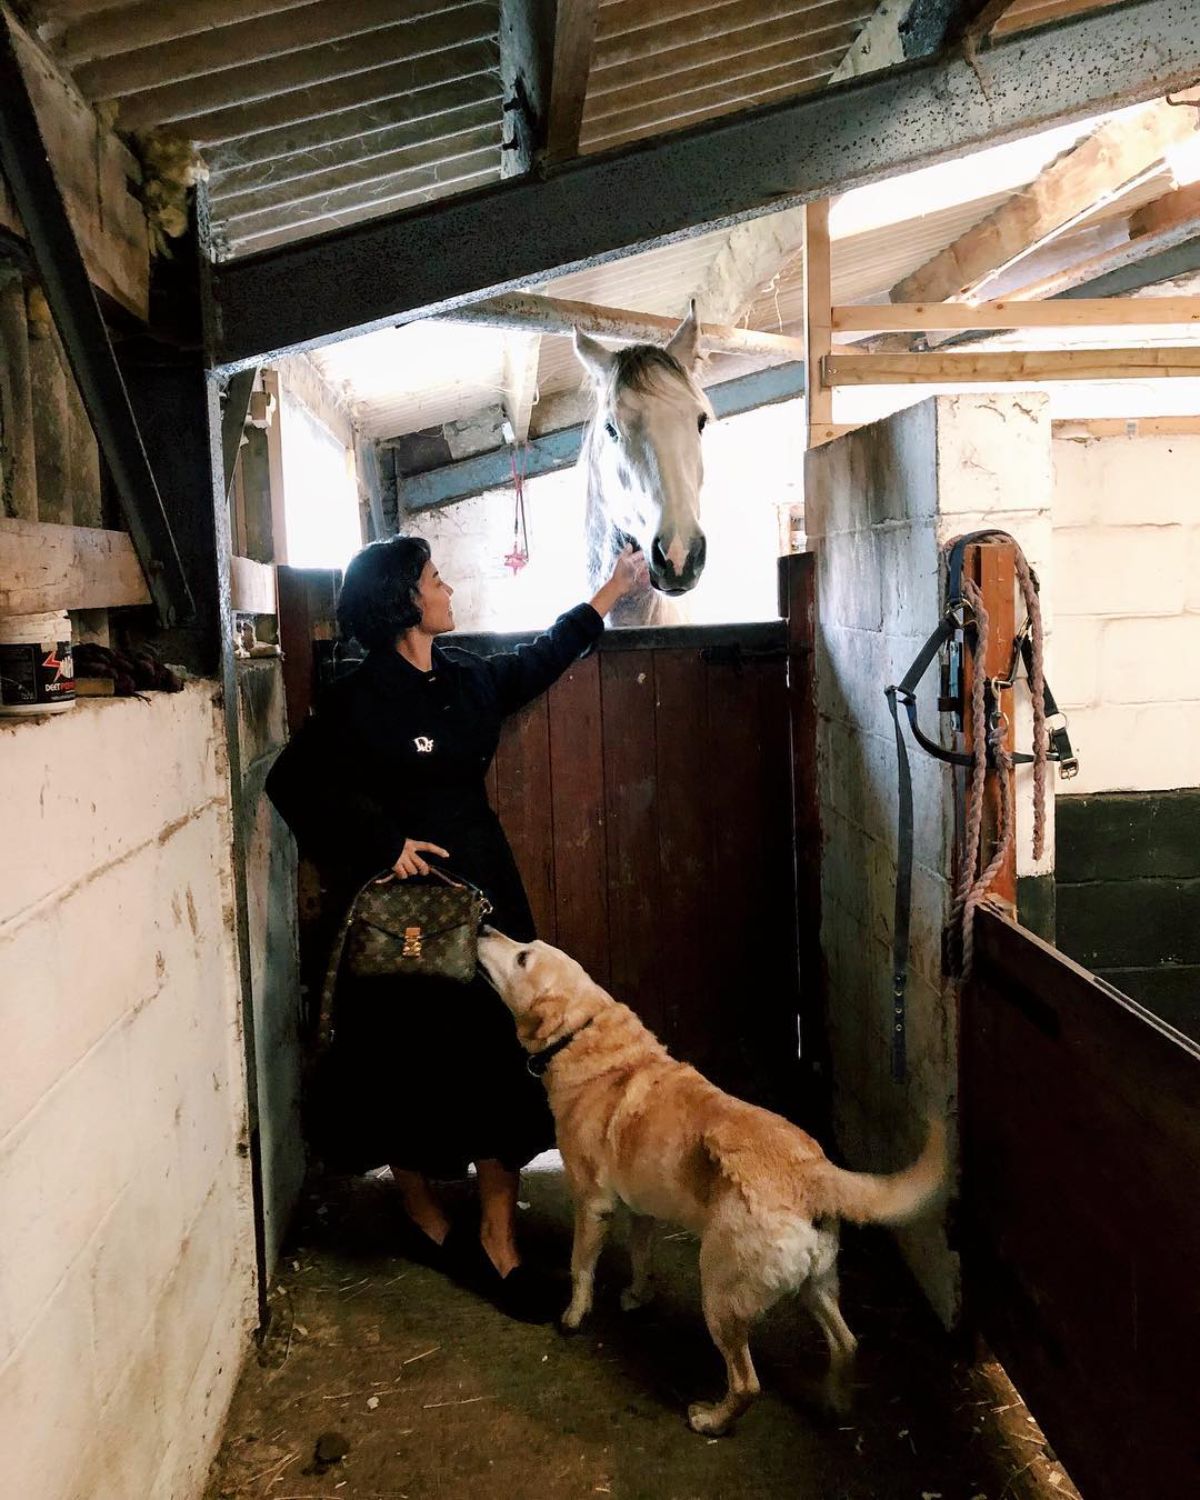 A woman with a dog pets a white horse in a stable.